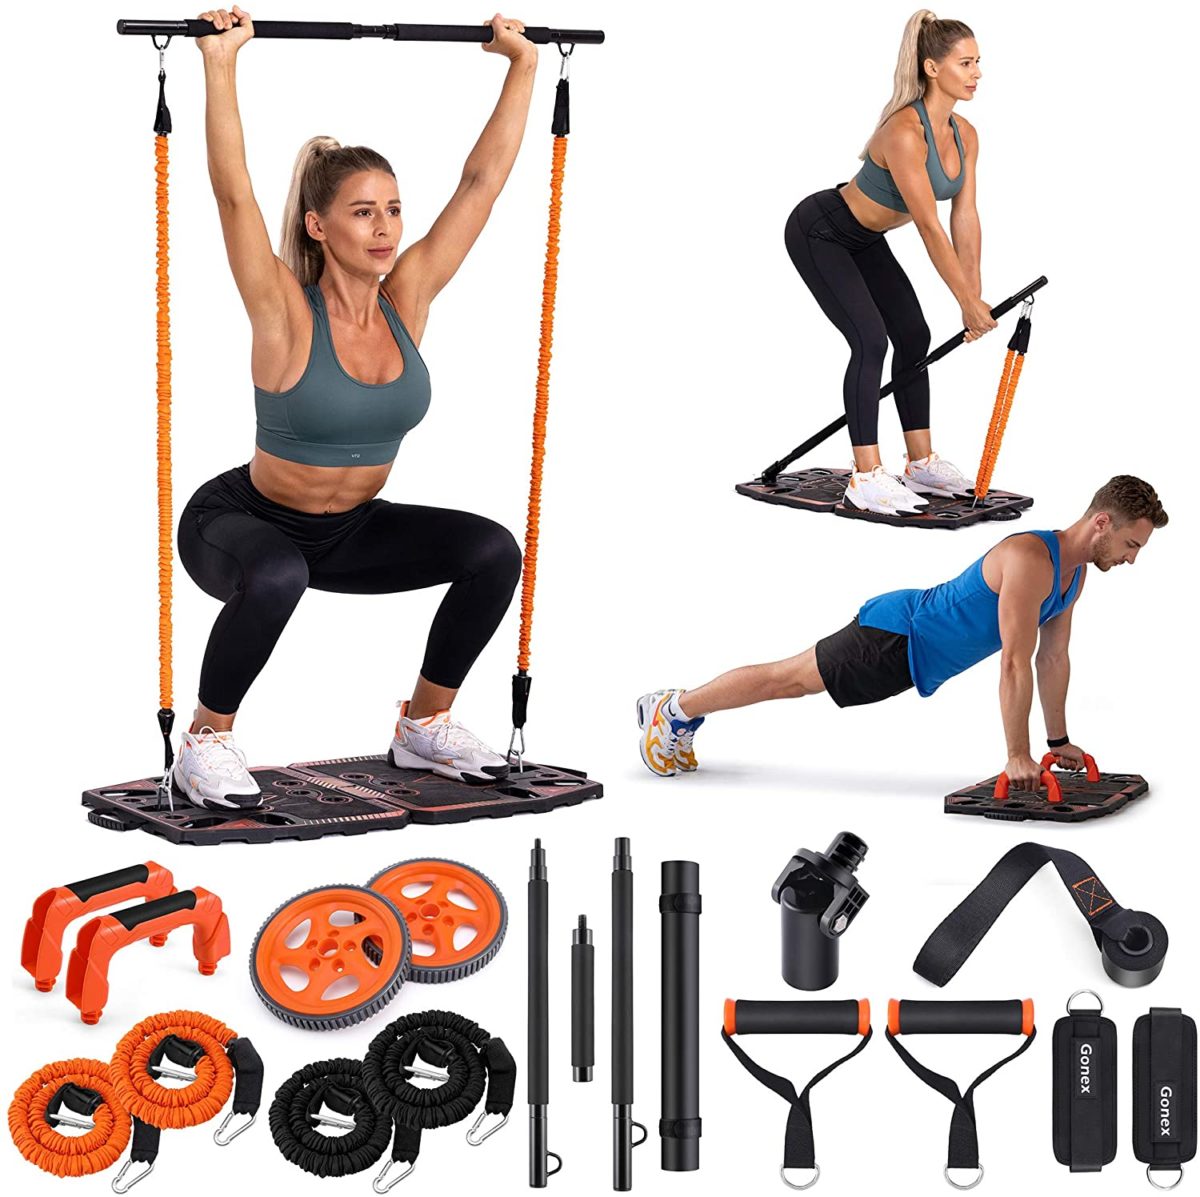 31 of Best Pieces of Workout Equipment You Can Buy on Amazon for Your Home Gym | With that said, here are 31 pieces of workout equipment you can buy on Amazon.